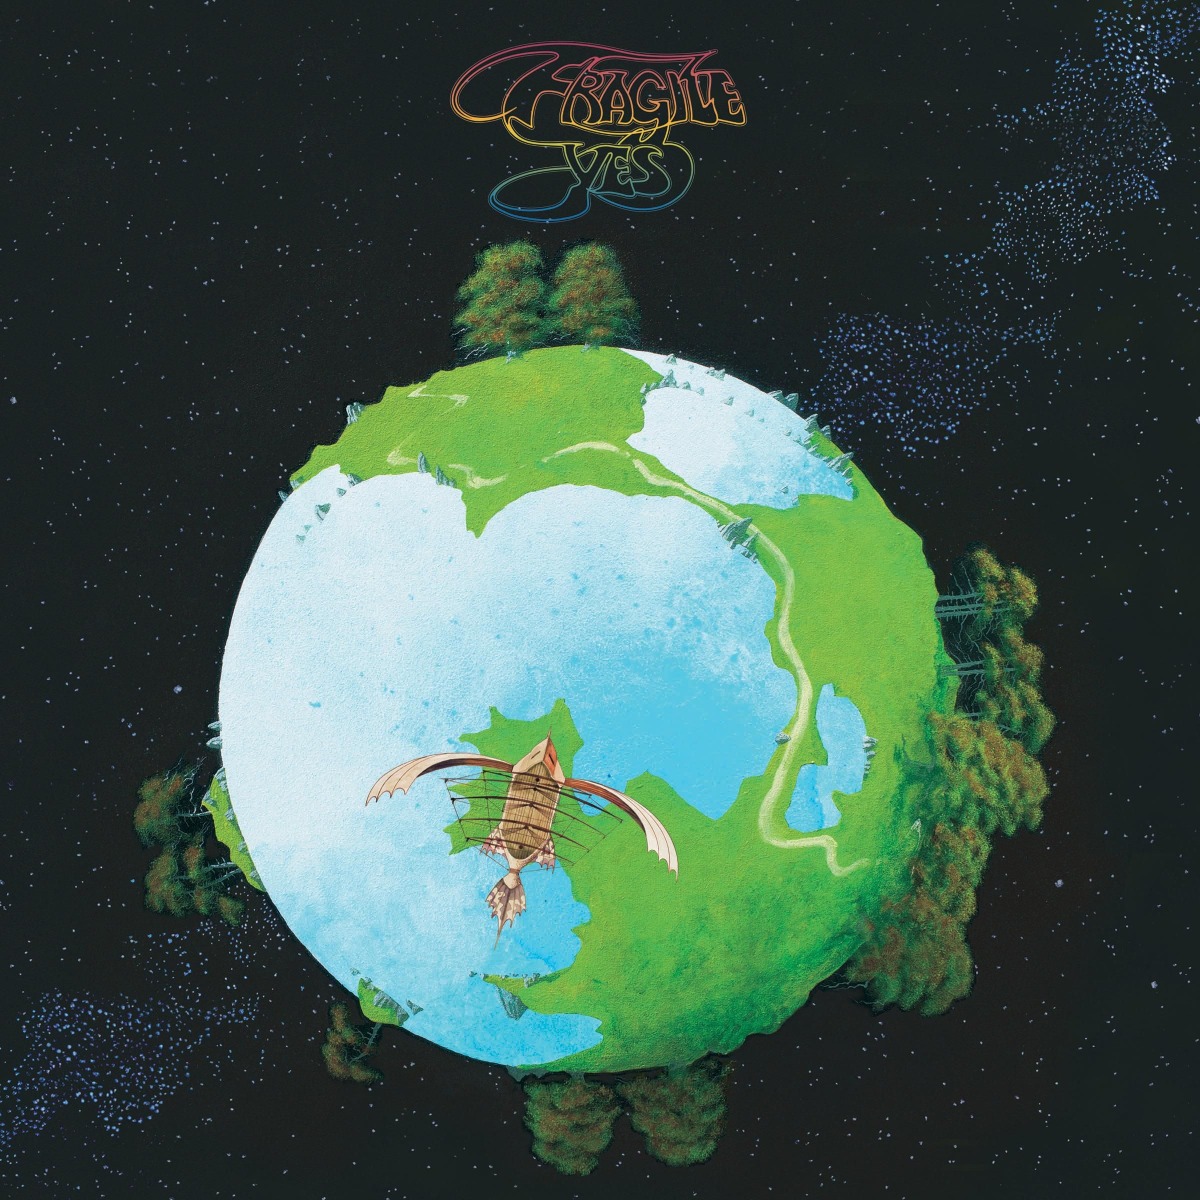 Cover of the album "Fragile" by Yes